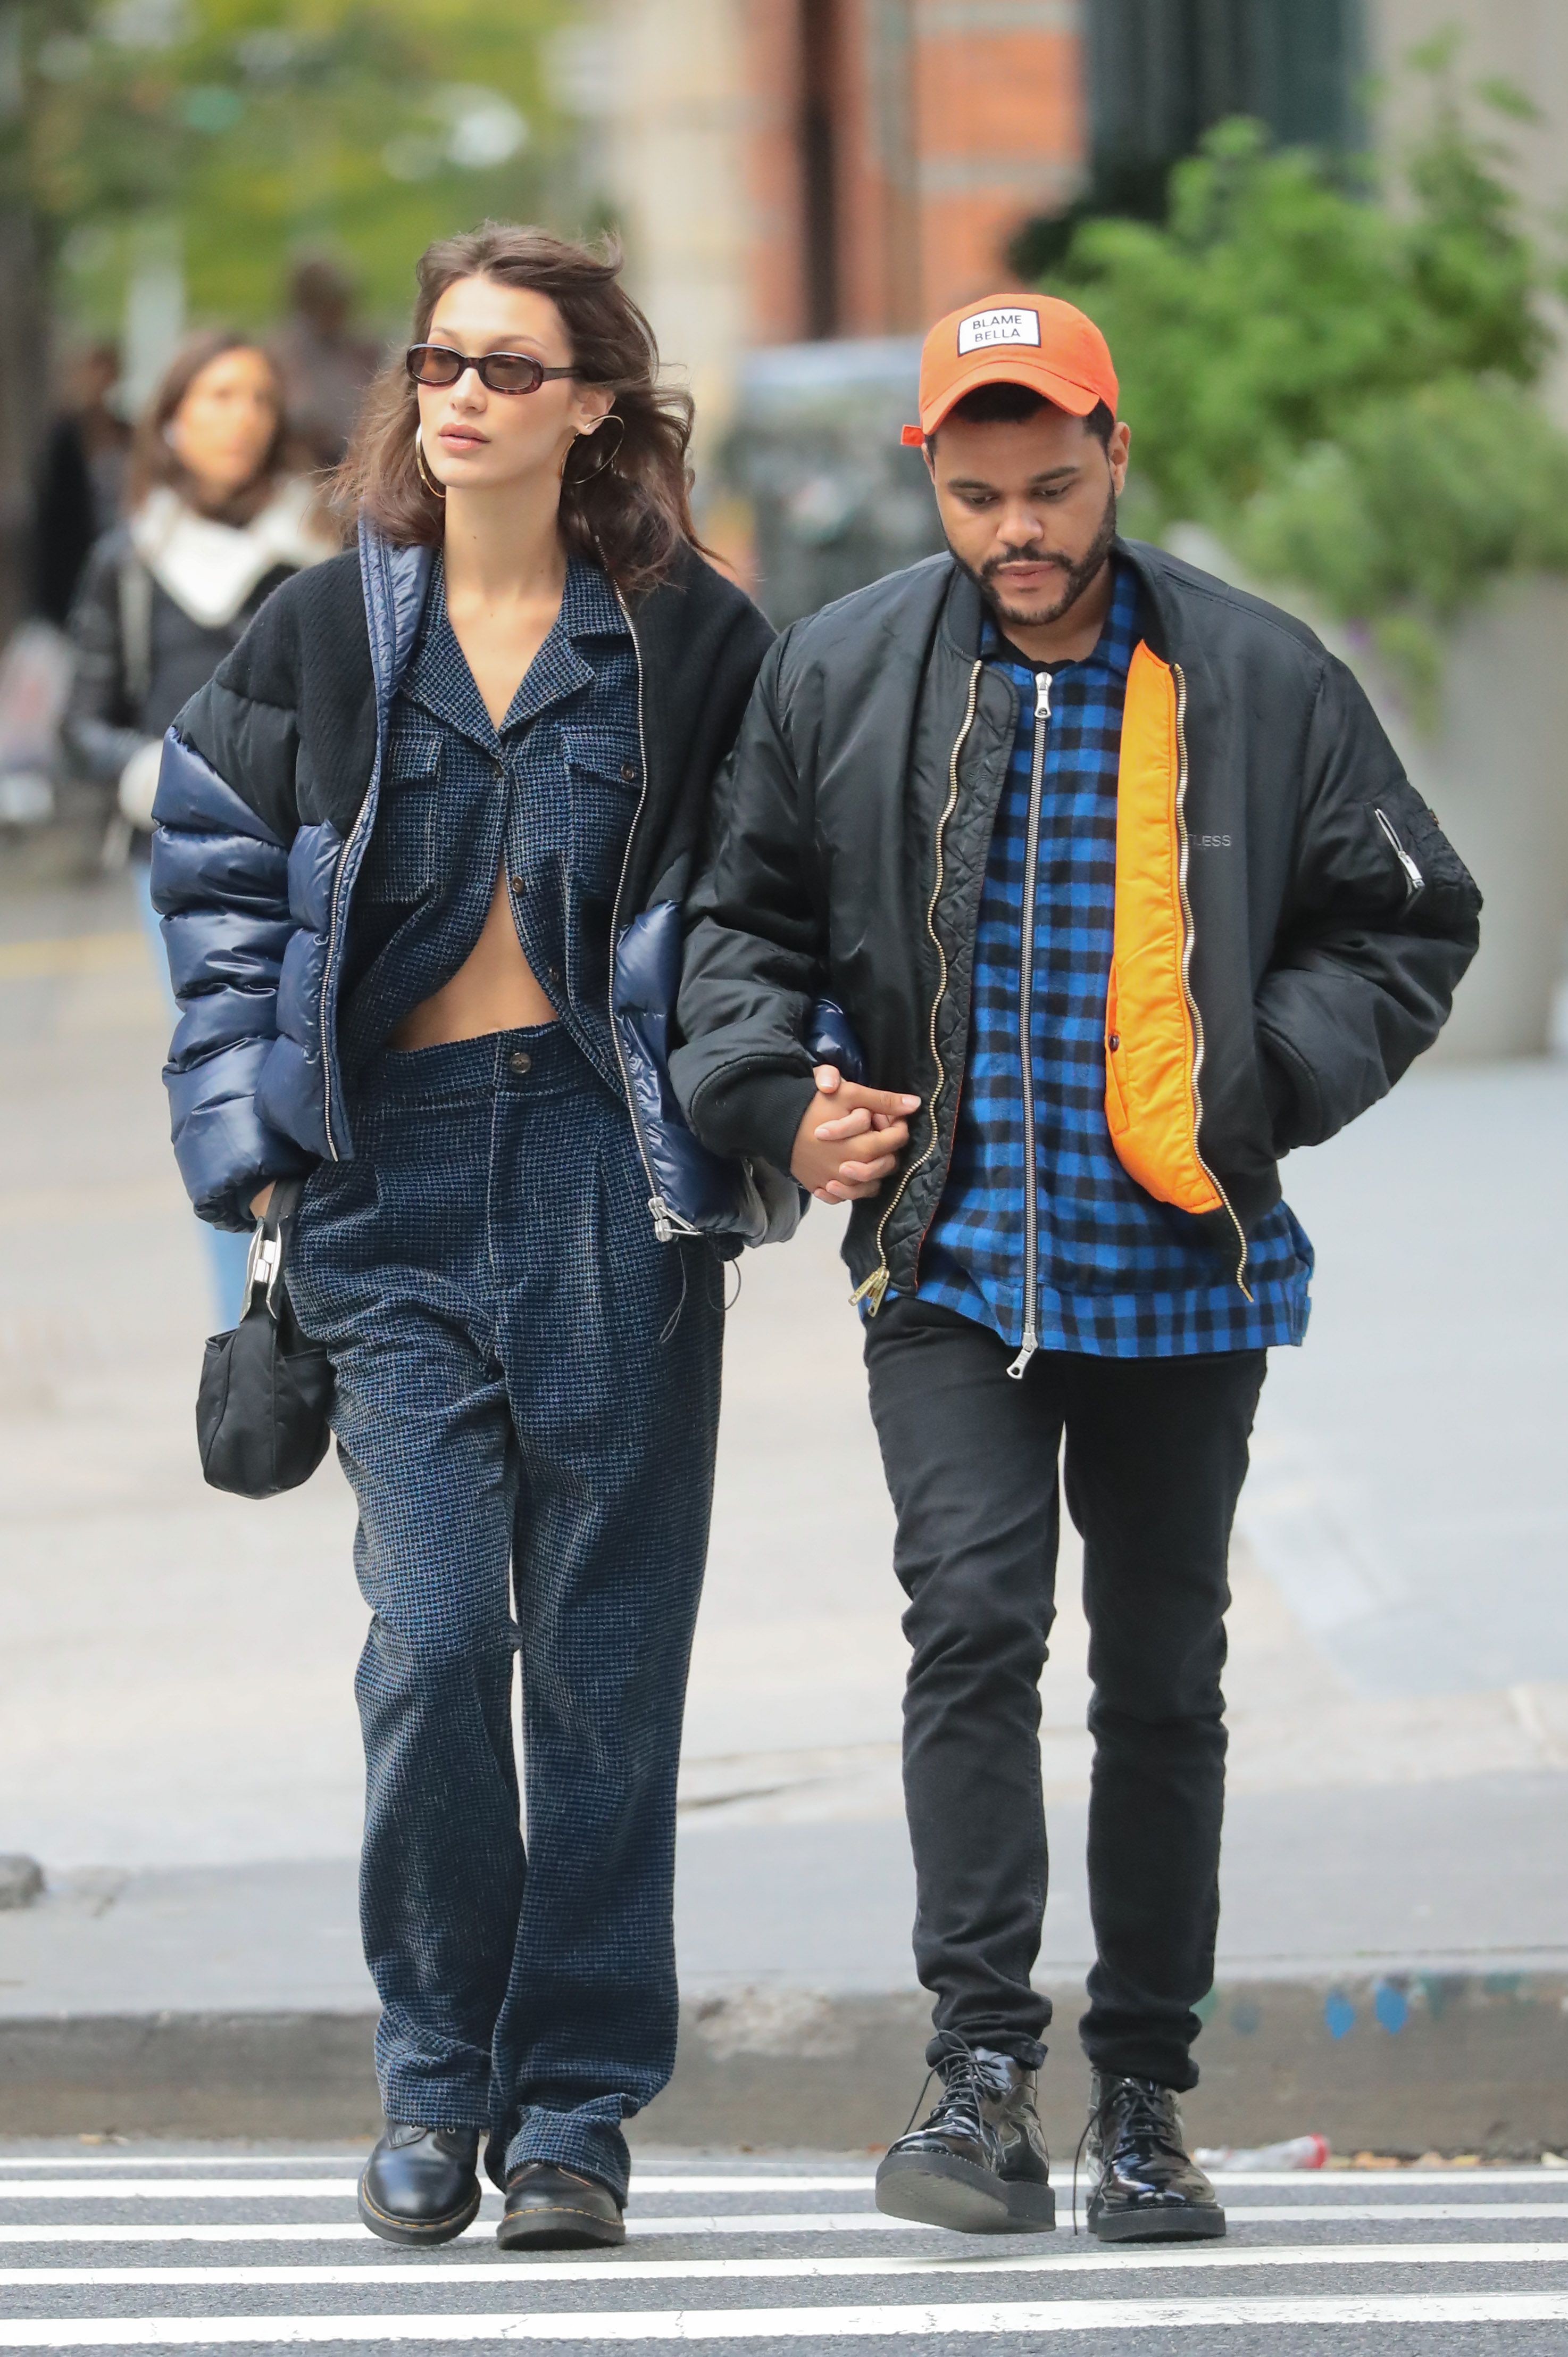 Bella Hadid and The Weeknd Wore Matching Outfits in New York City